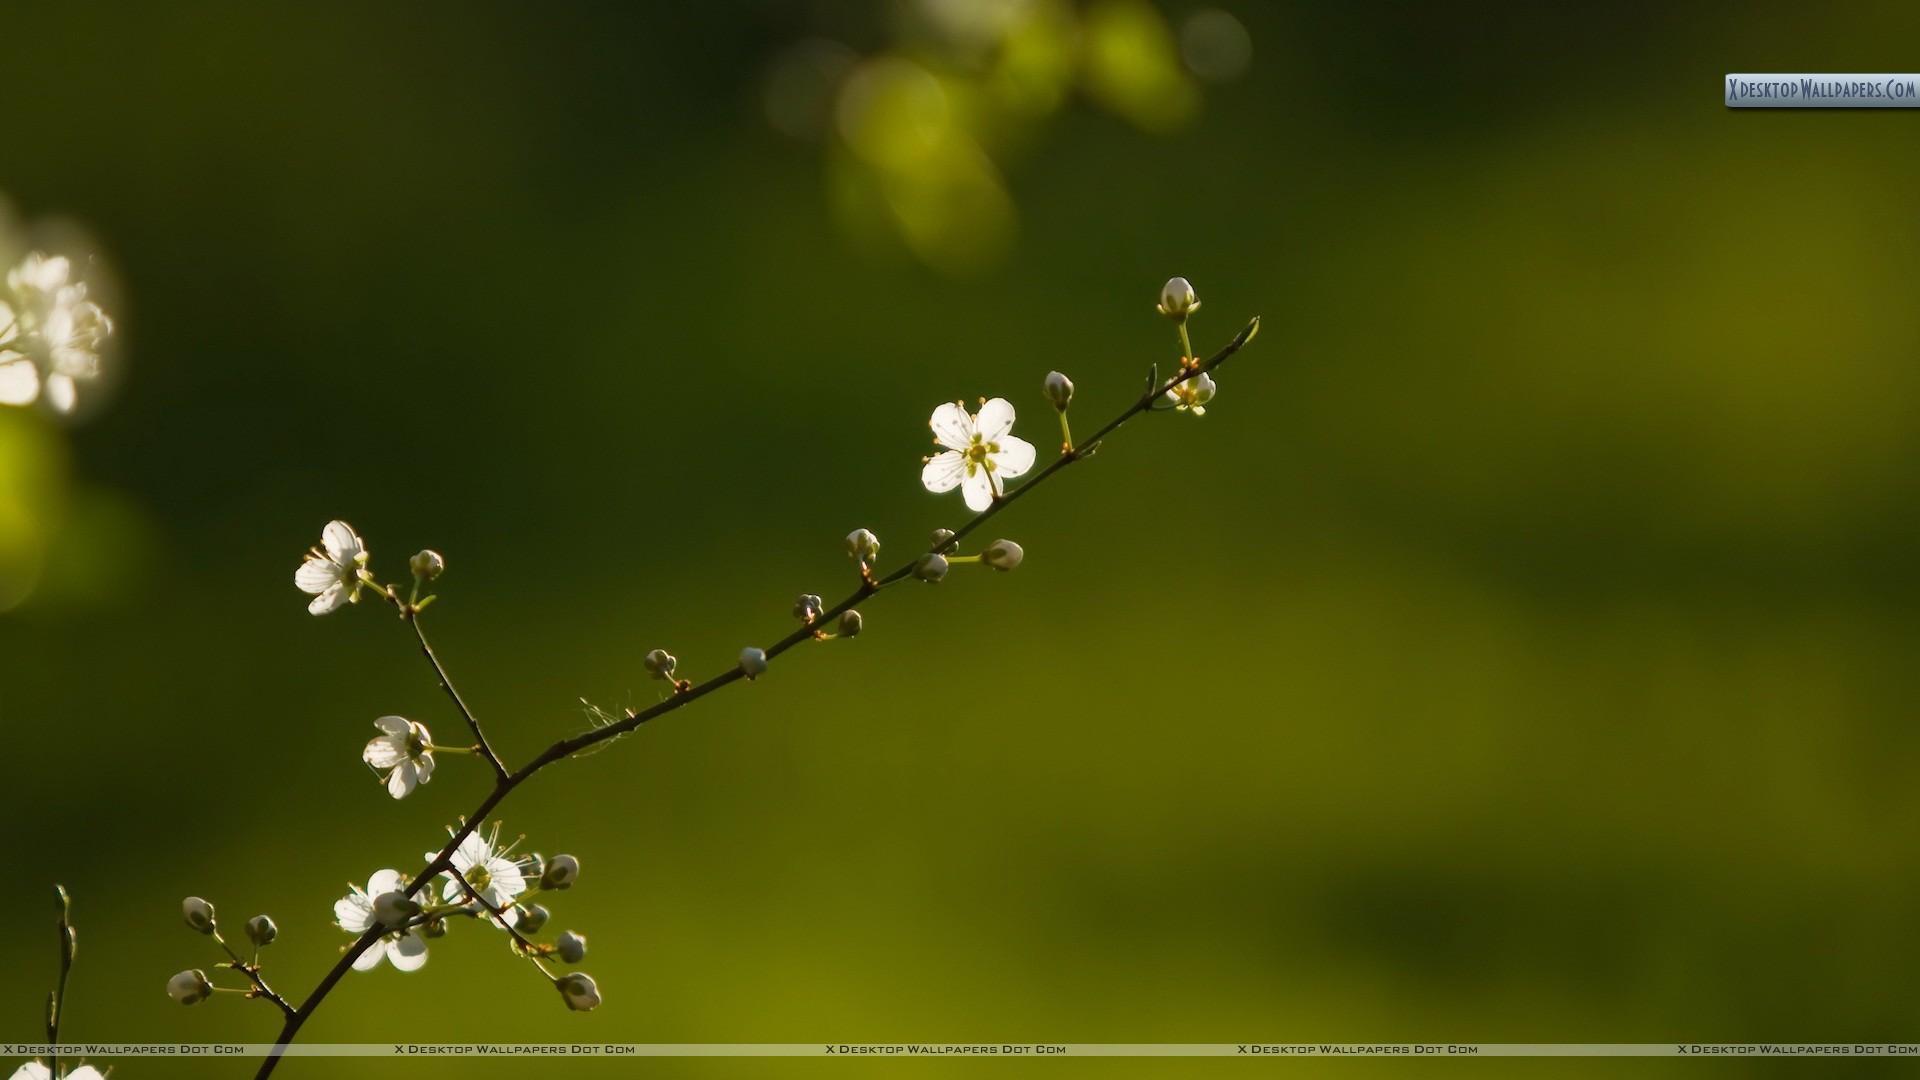 White Flowers Wallpaper, Photo & Image in HD